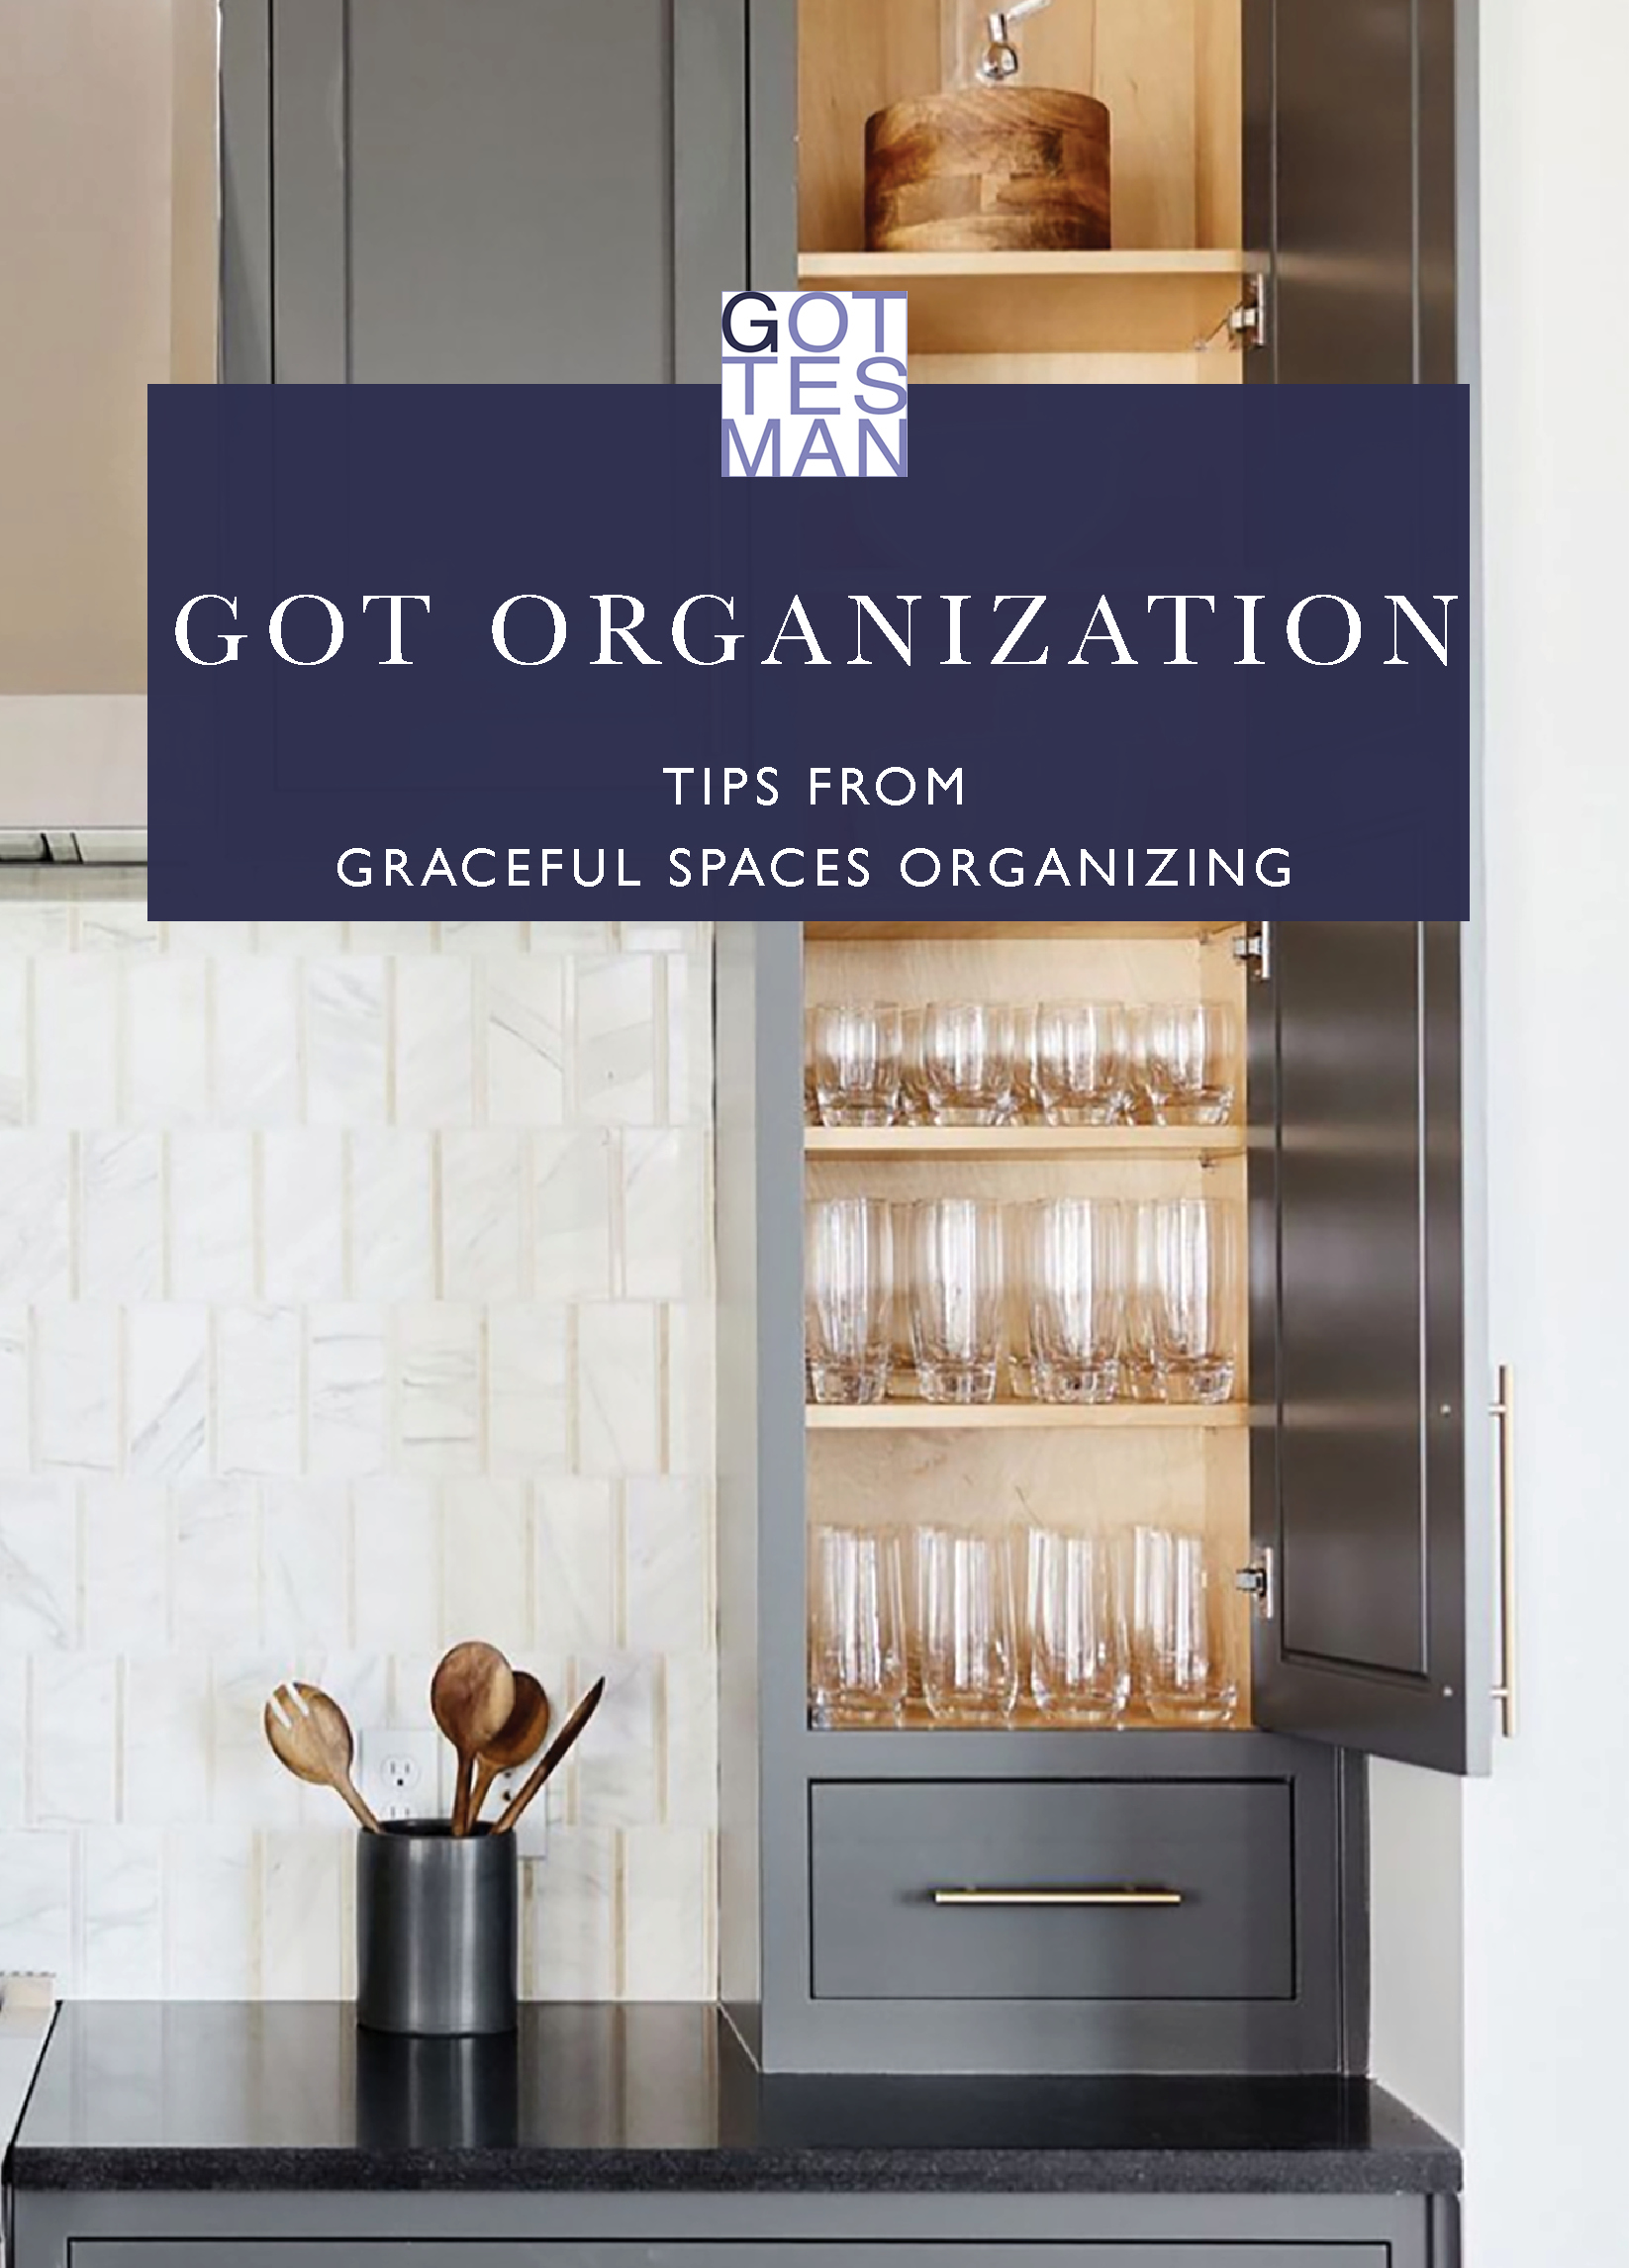 "Got Organization: Tips from Graceful Spaces Organizing"